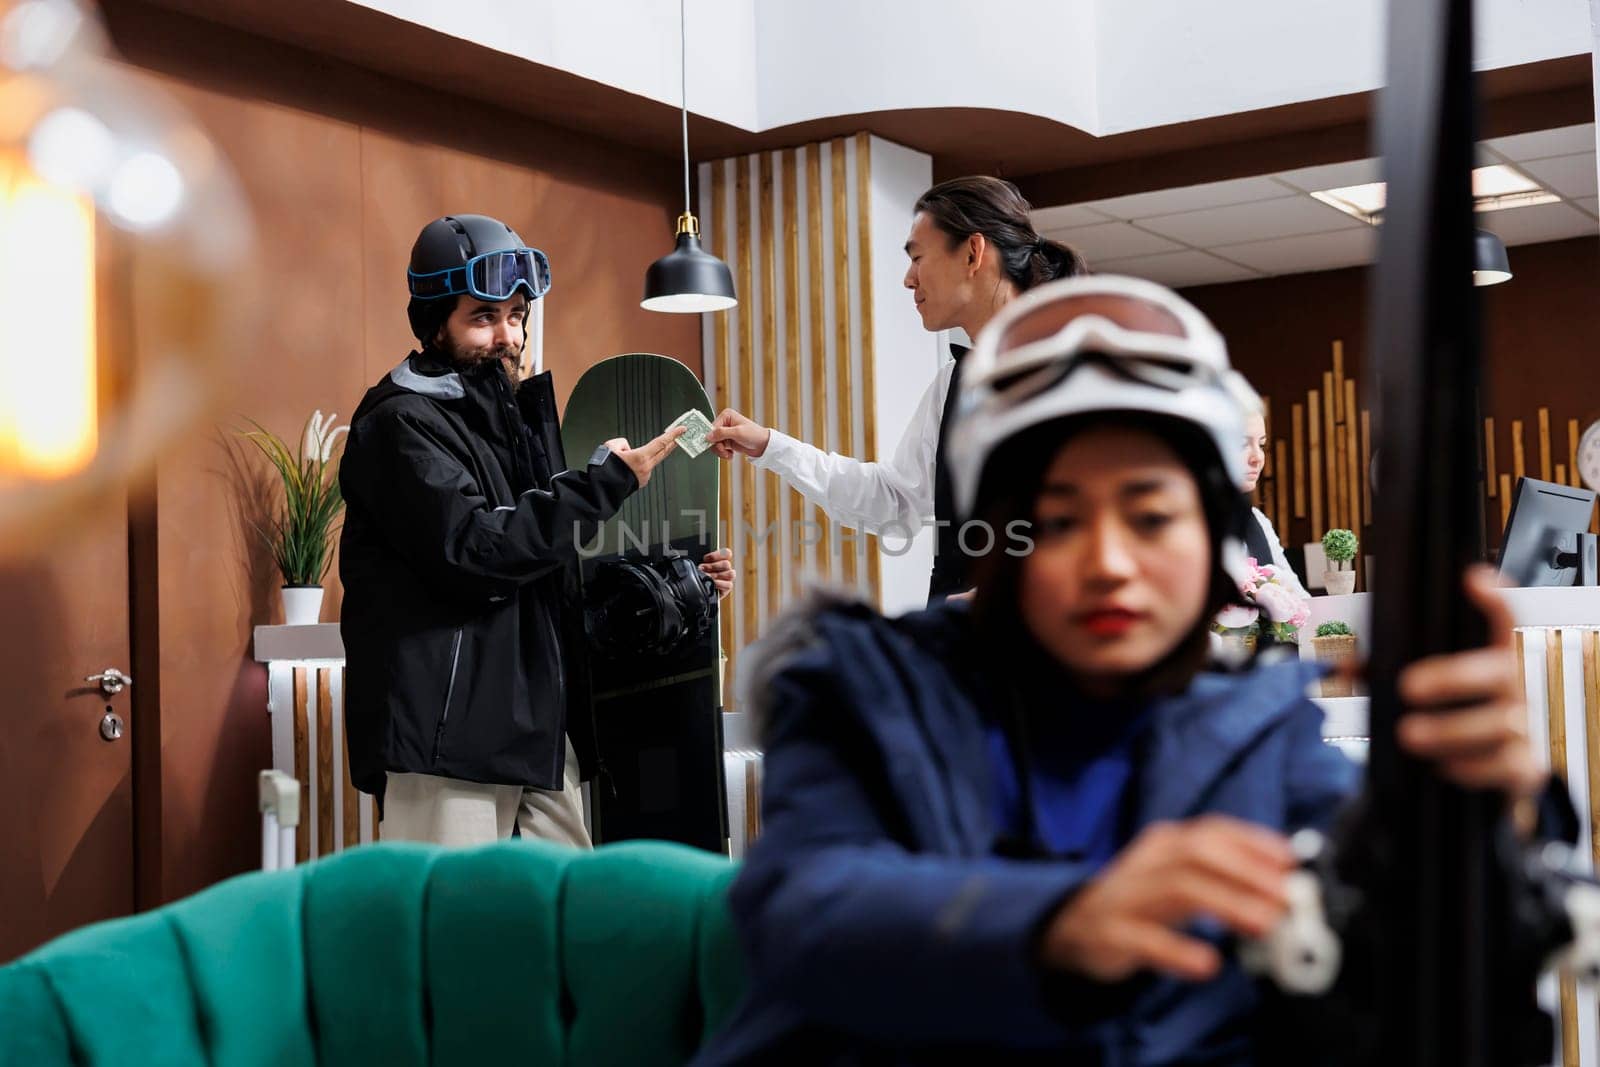 Image shows woman adjusting skiing equipment on sofa while man with snowboard gives money to concierge for good customer service. Male tourist tipping staff in hotel lobby as lady waits on couch.